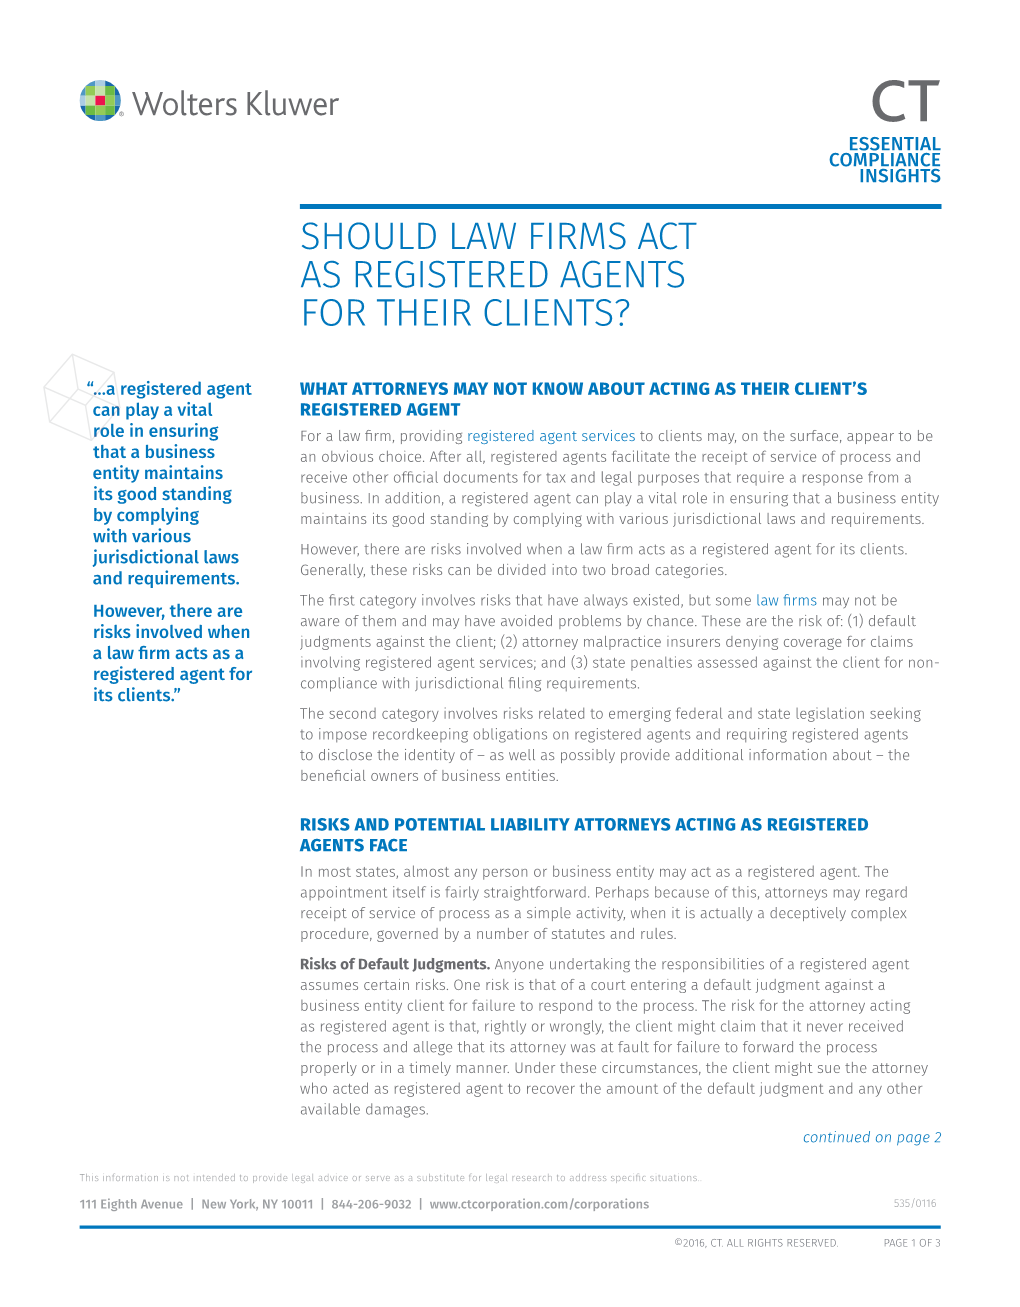 Should Law Firms Act As Registered Agents for Their Clients?